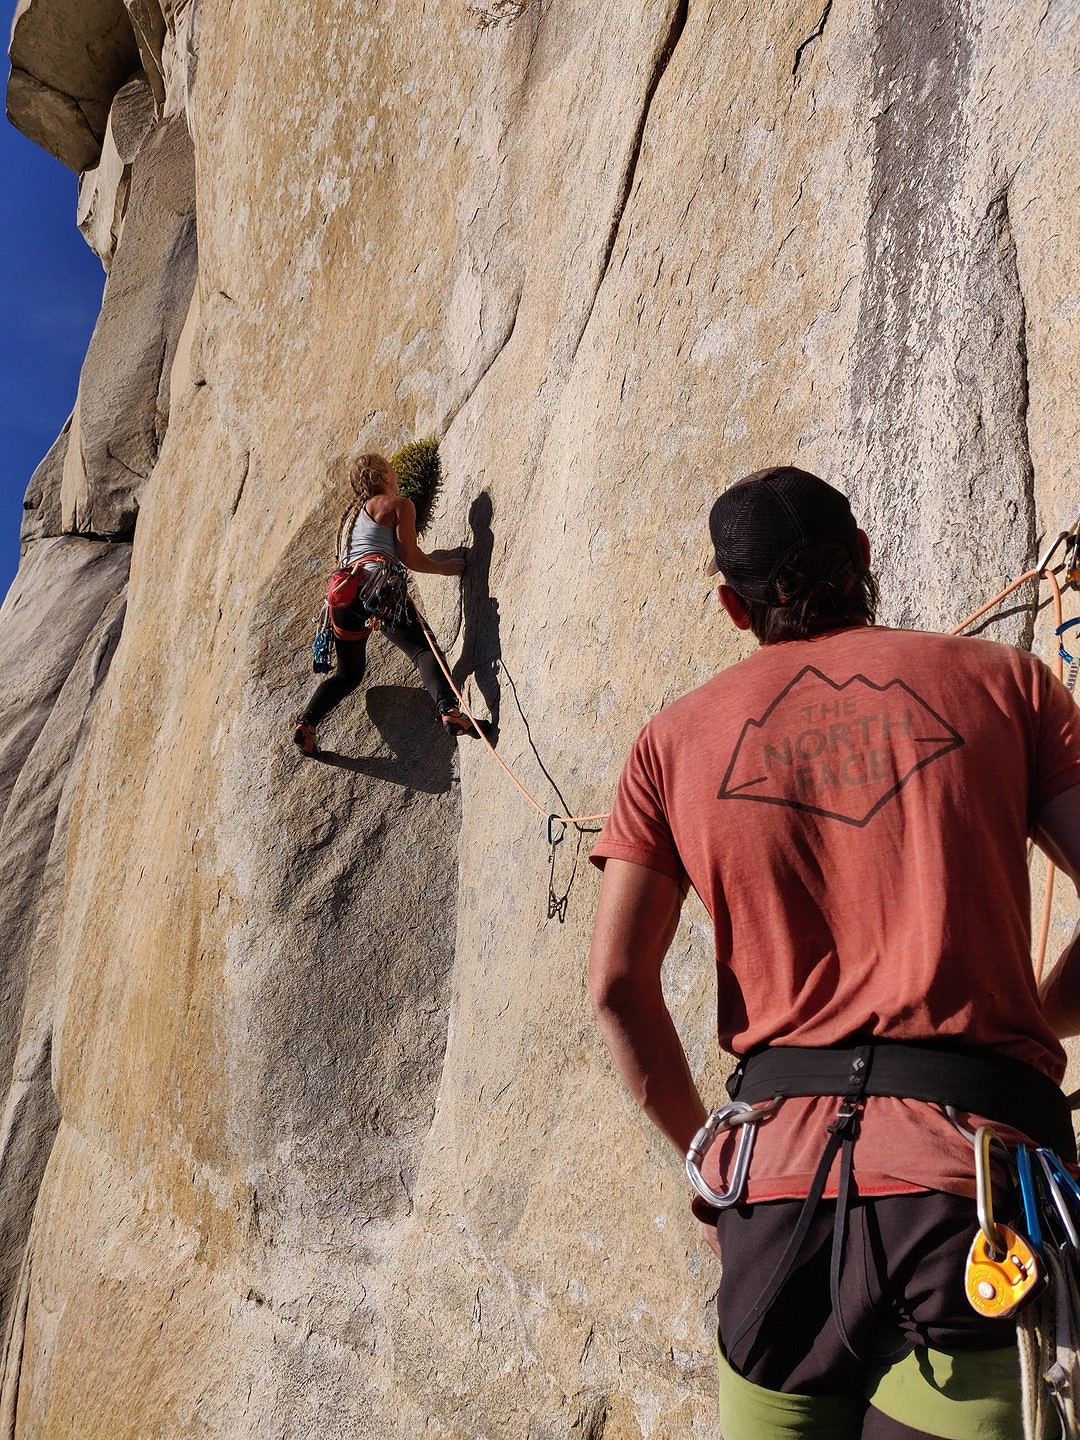 Emily Harrington and Alex Honnold join the party.  © Angus Kille